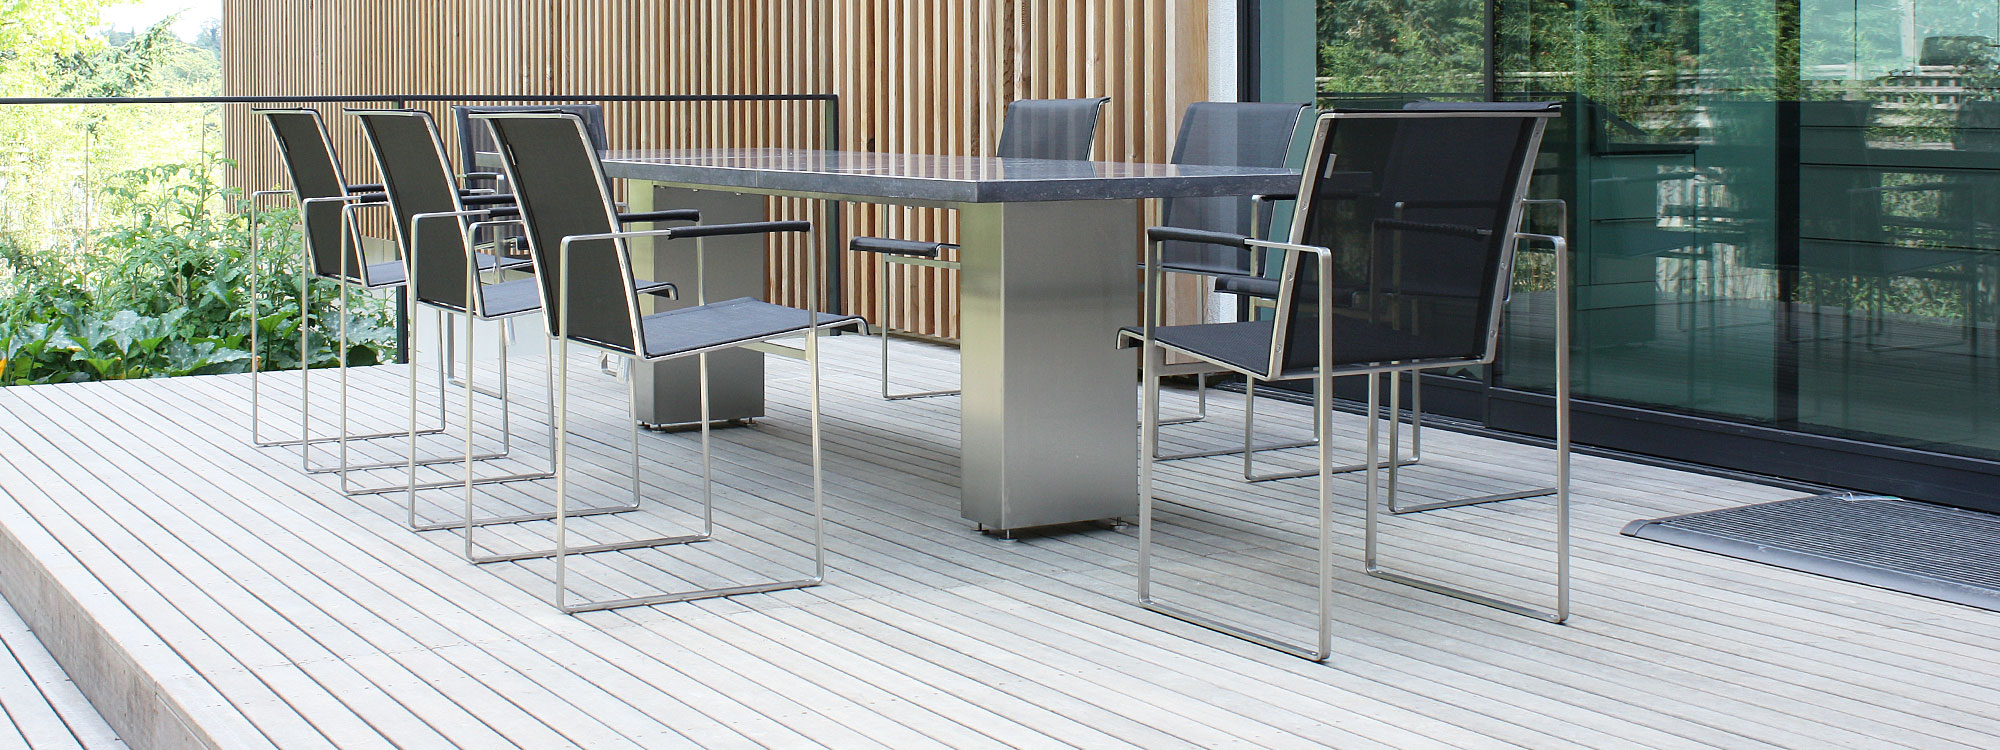 Image of installation of FueraDentro Doble minimalist garden dining table and Sillon outdoor chairs